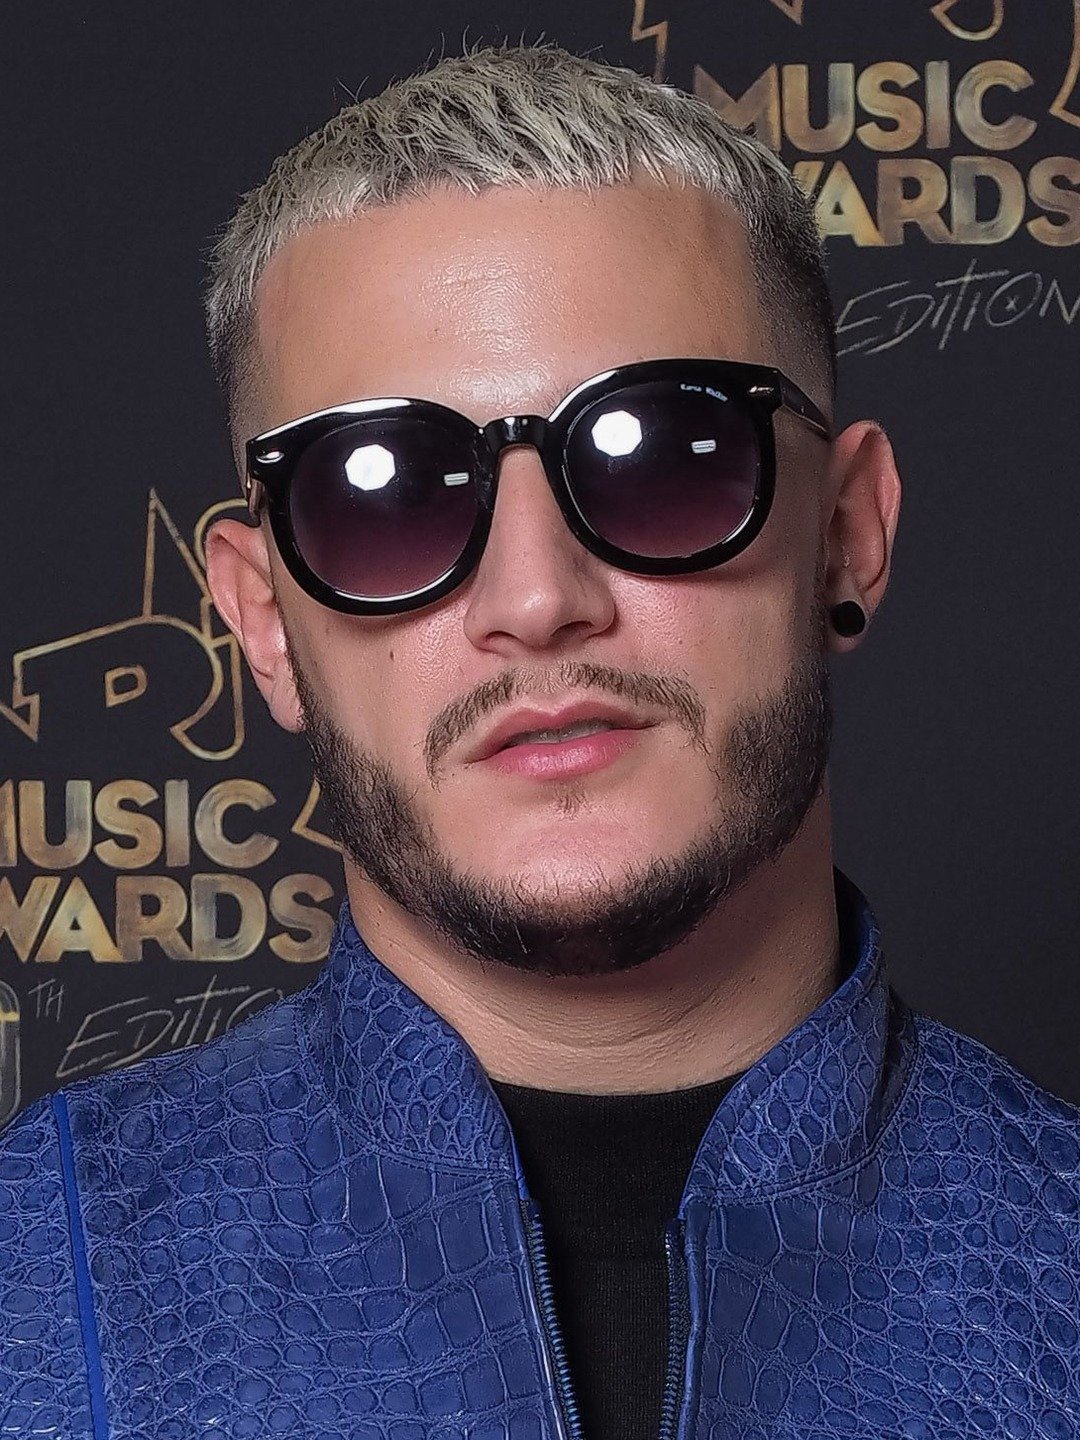 Share more than 72 dj snake hairstyle best - in.eteachers